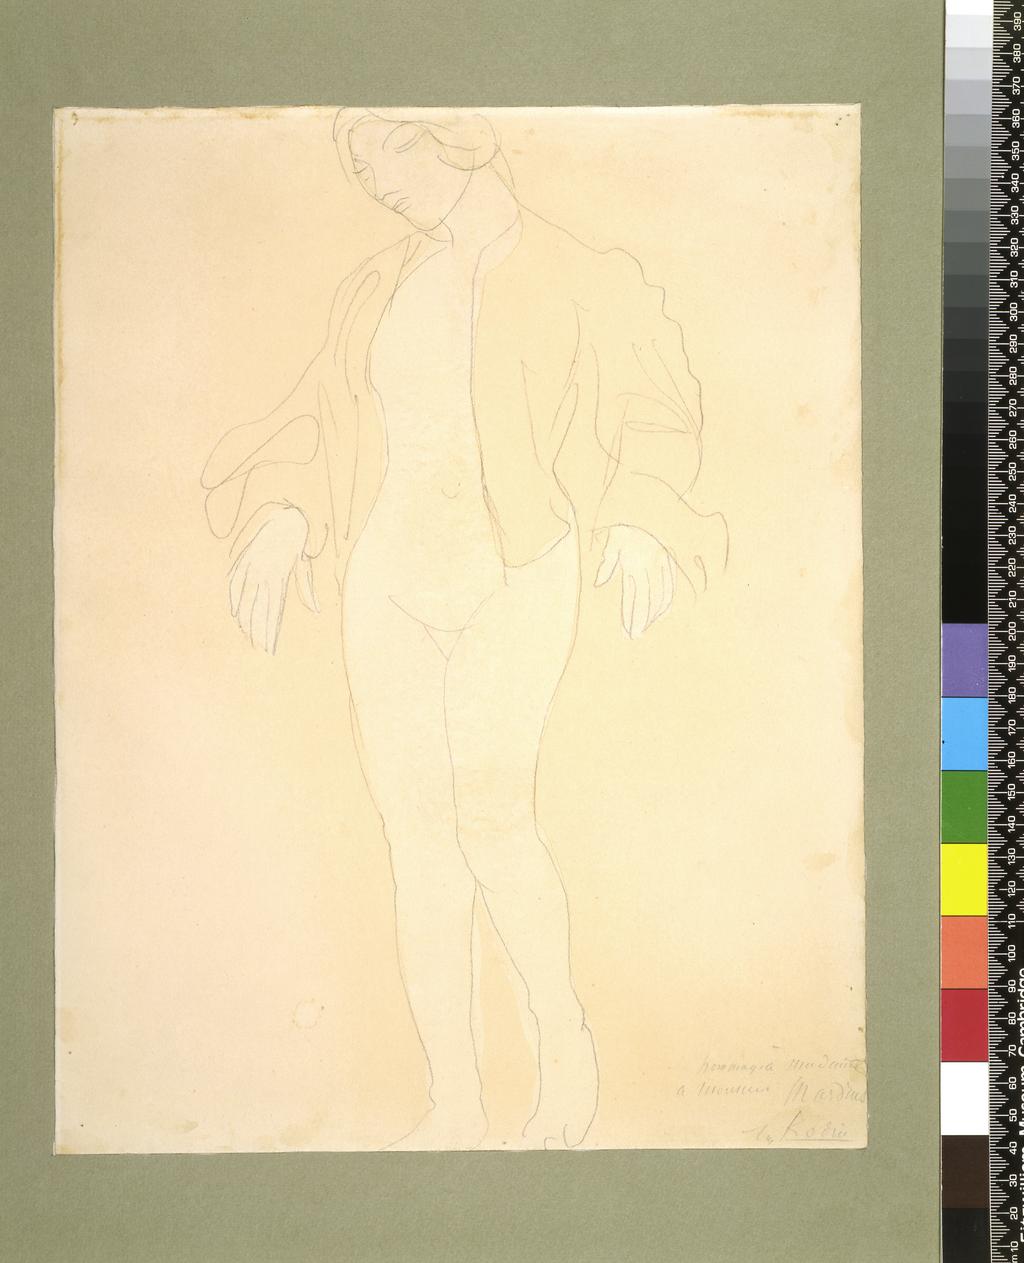 An image of Title/s: A nude female dancer Maker/s: Rodin, Auguste (draughtsman) [ULAN info: French artist, 1840-1917] Technique Description: graphite outline with watercolour washes, on paper Dimensions: height: 320 mm, width: 250 mm 